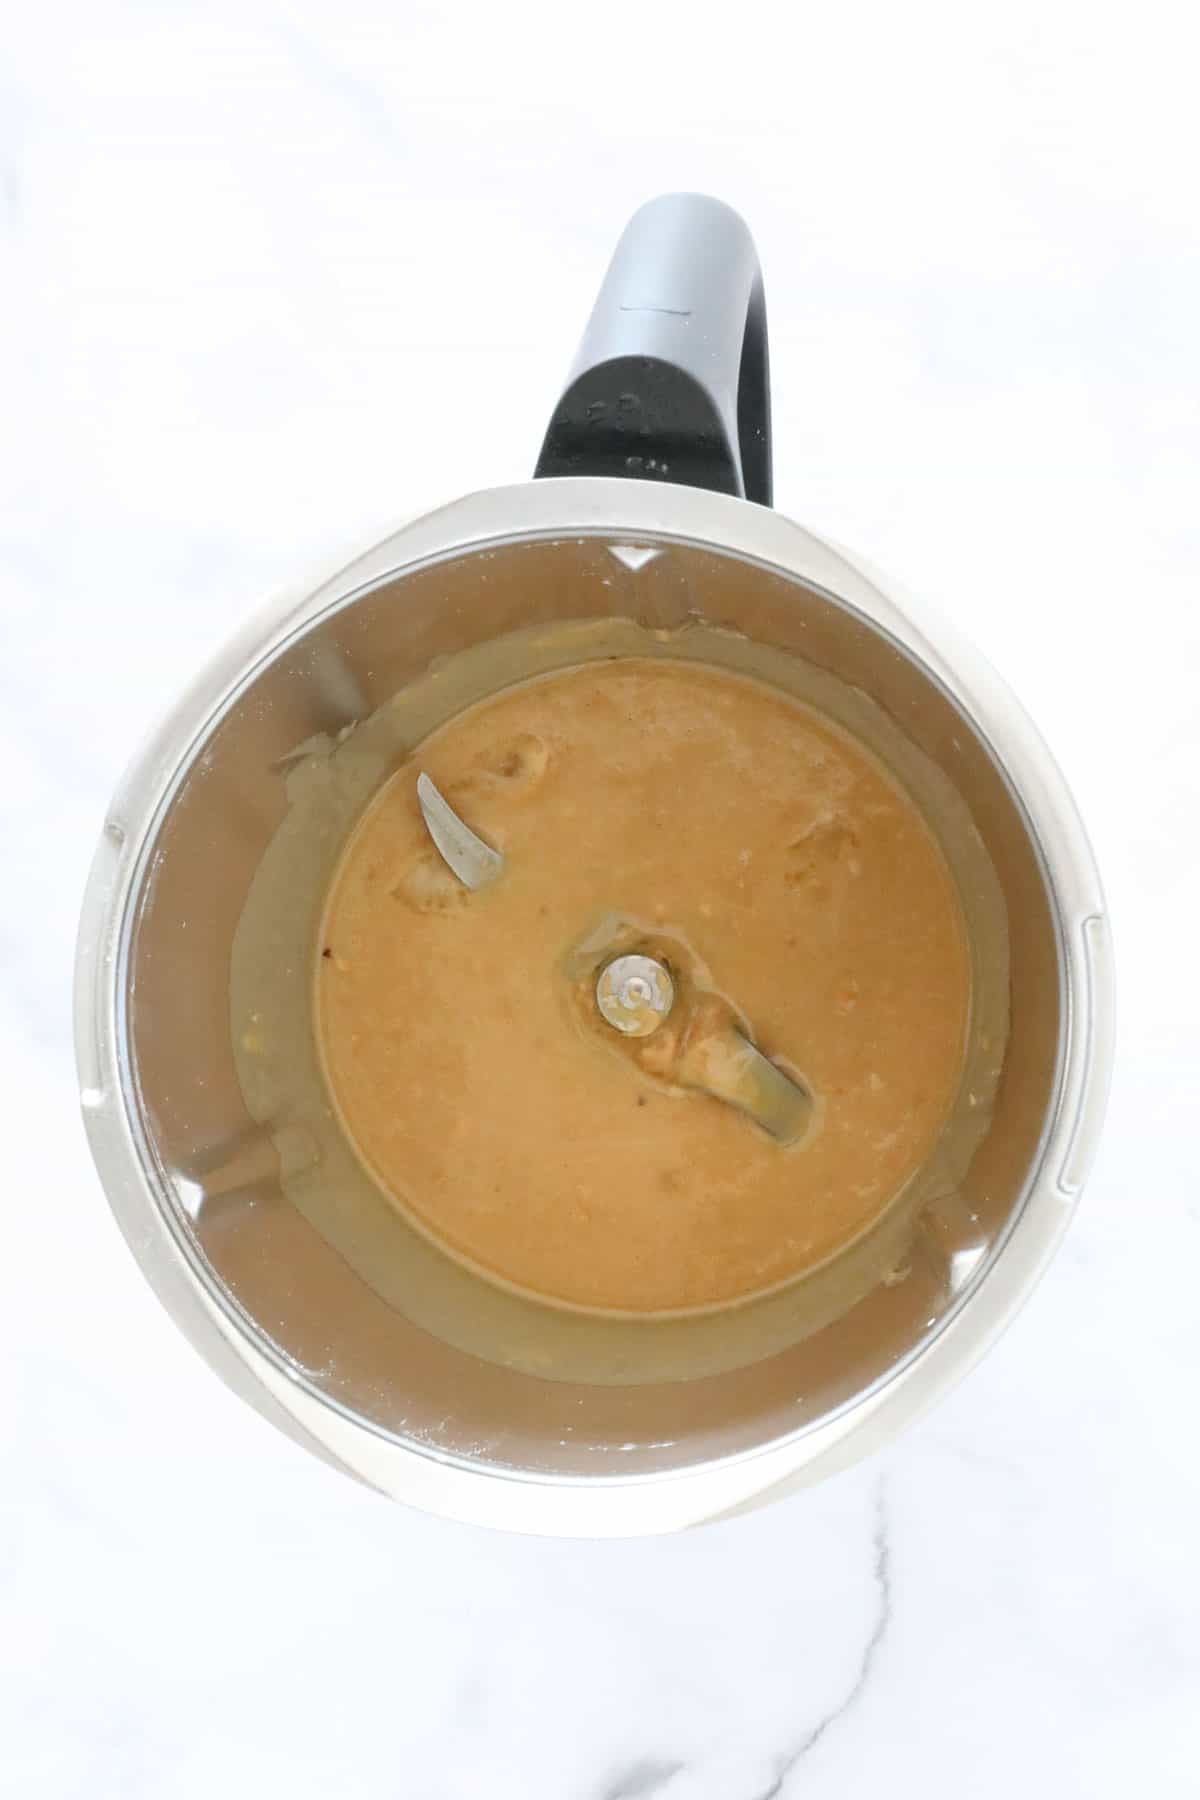 Melted peanut butter and honey in a Thermomix.